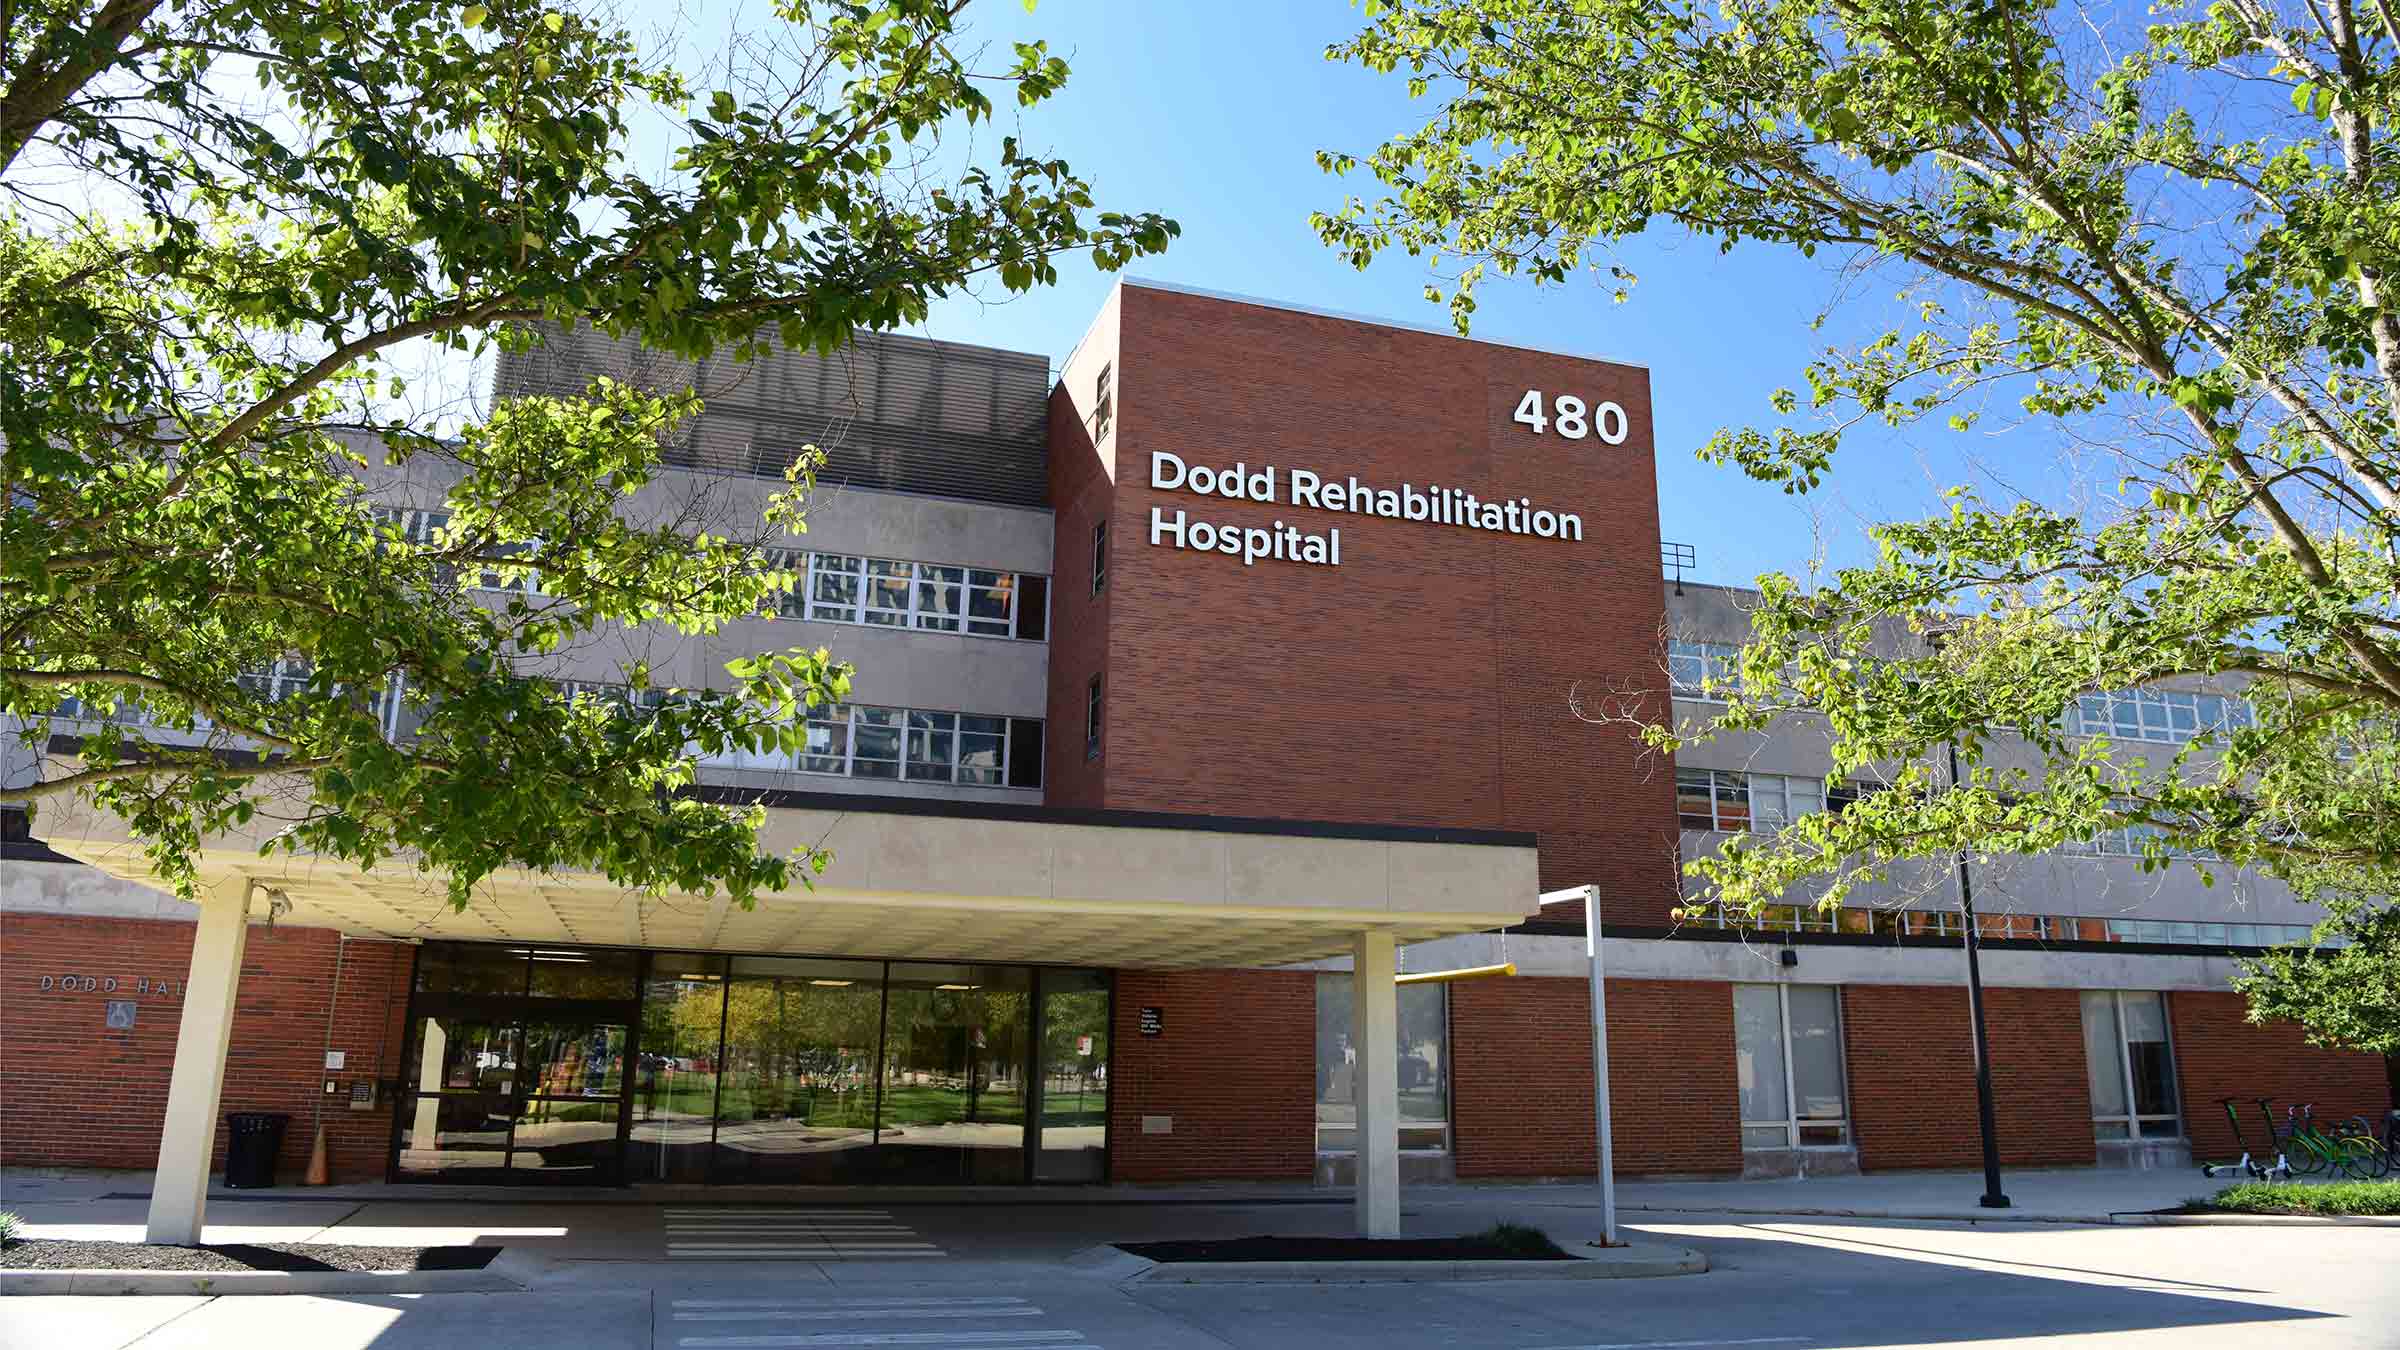 Exterior of the Dodd Rehabilitation building as it is now